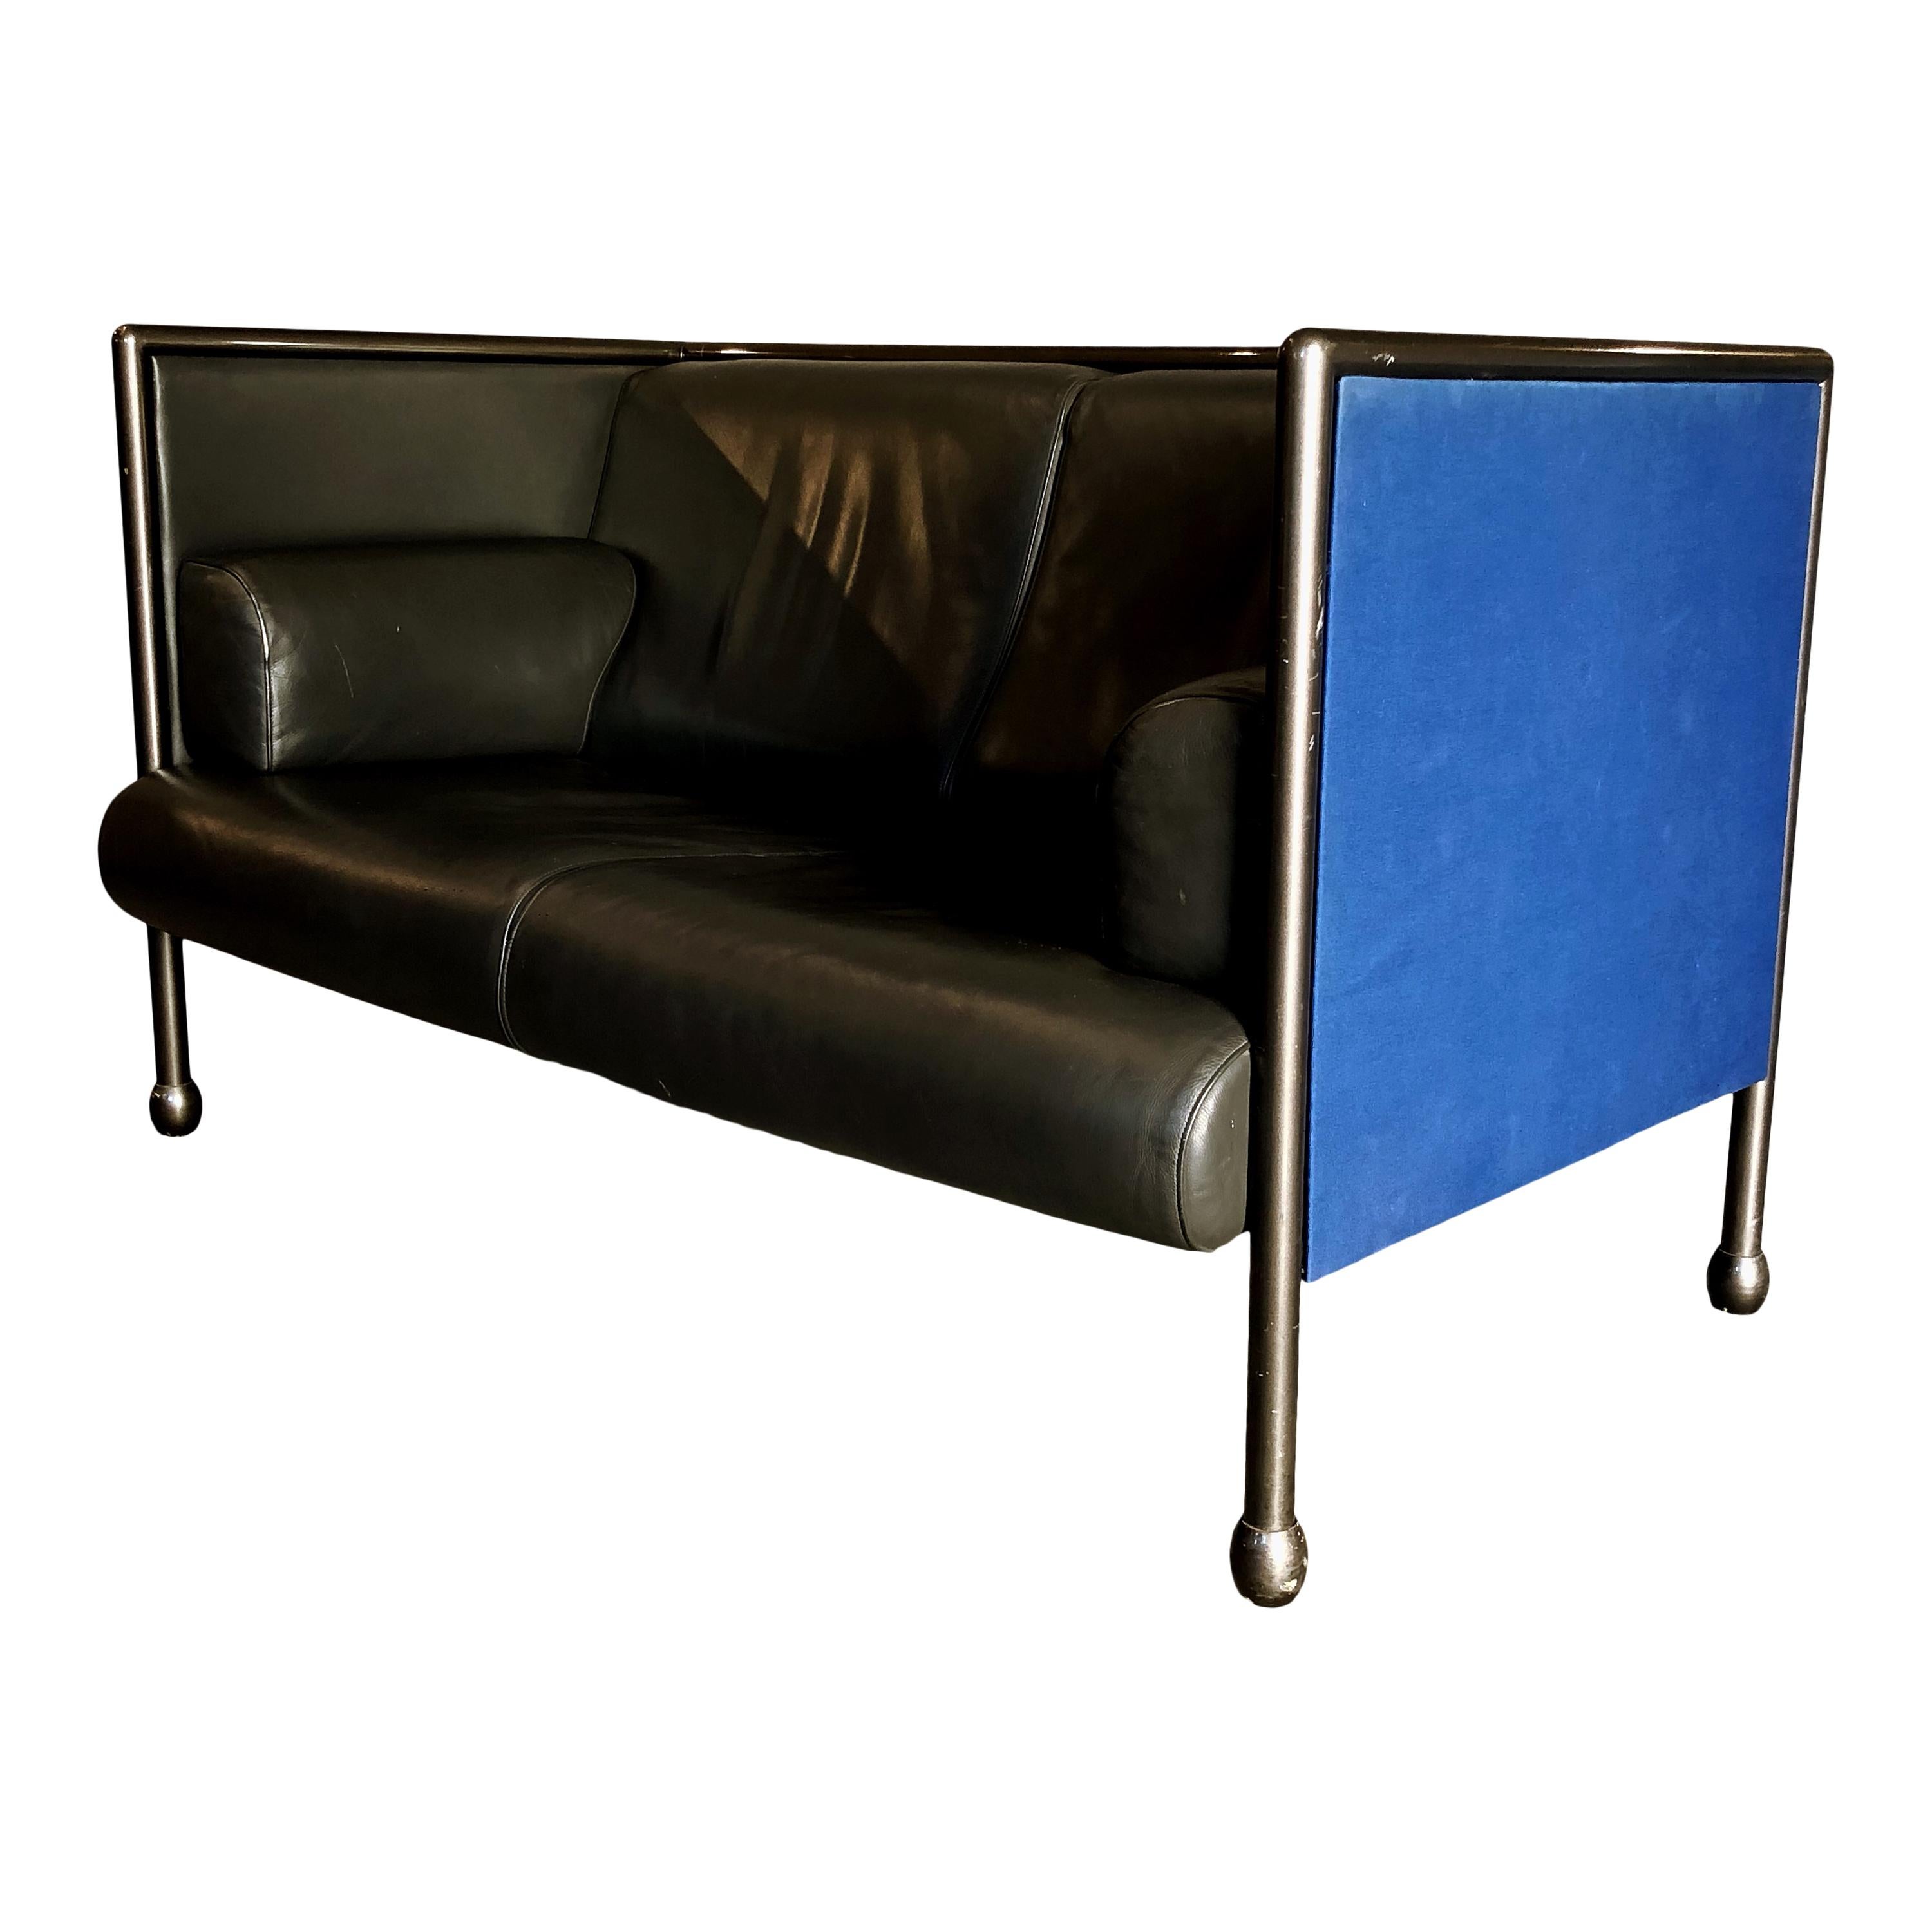 Aluminum Ettore Sottsass Postmodern Iron and Black Leather Danube Sofa for Cassina, 1992 For Sale